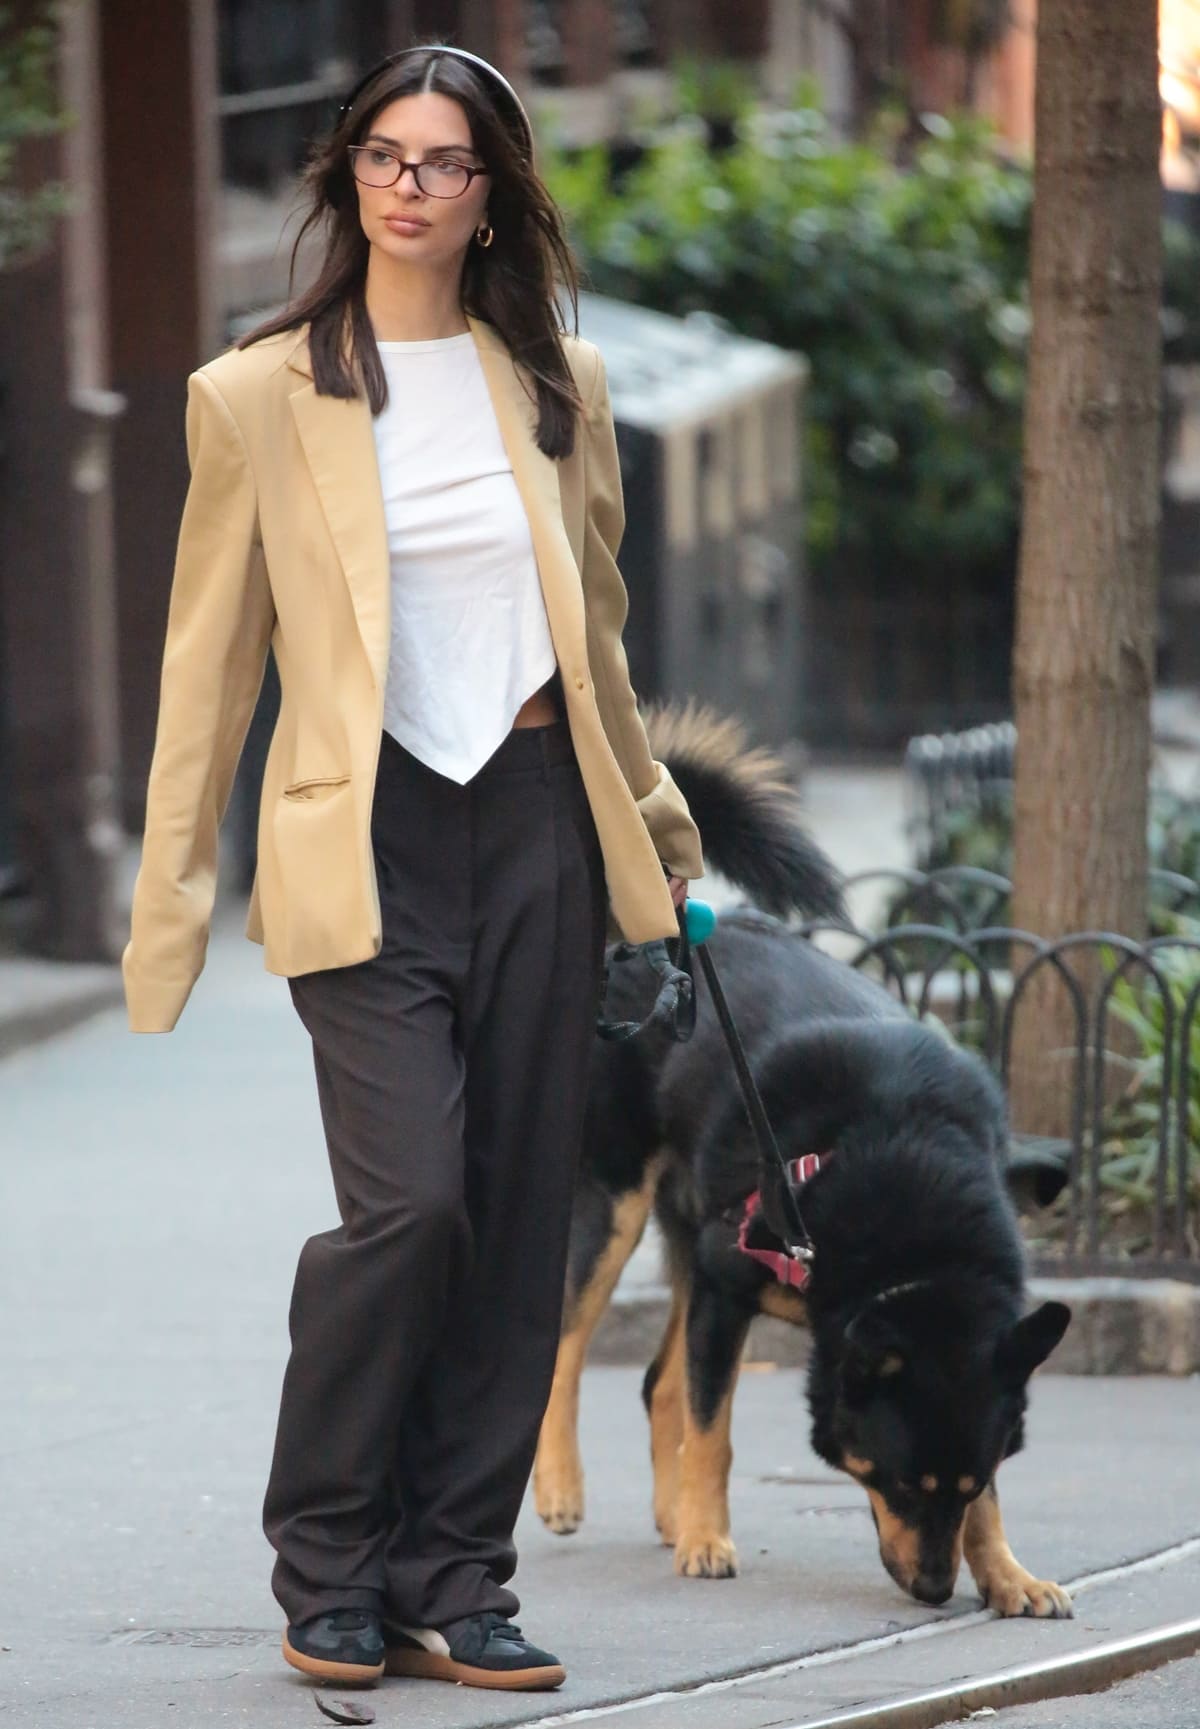 Accompanied by her loyal companion, Colombo, Emily Ratajkowski takes to the streets of West Village in style, her oversized beige blazer and Puma sneakers making a statement of effortless elegance and companionship